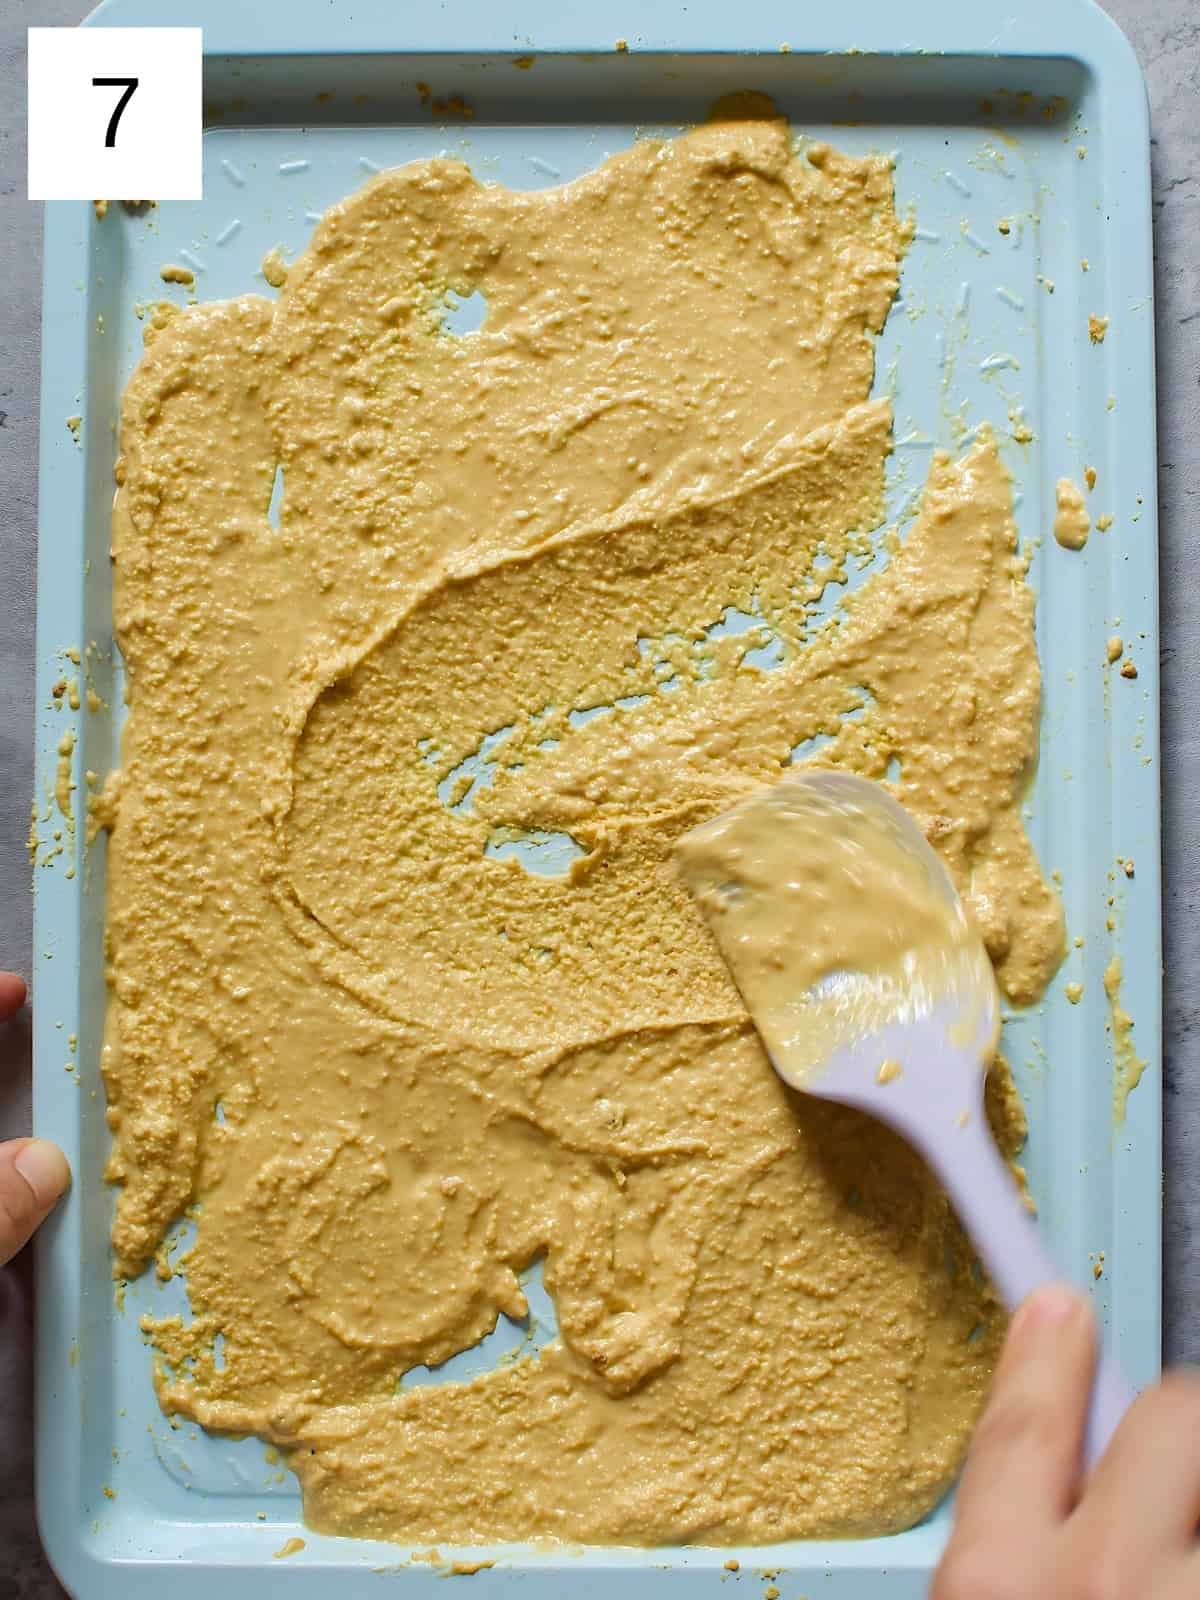 Melted white chocolate being on a baking tray being stirred with a baking spatula.